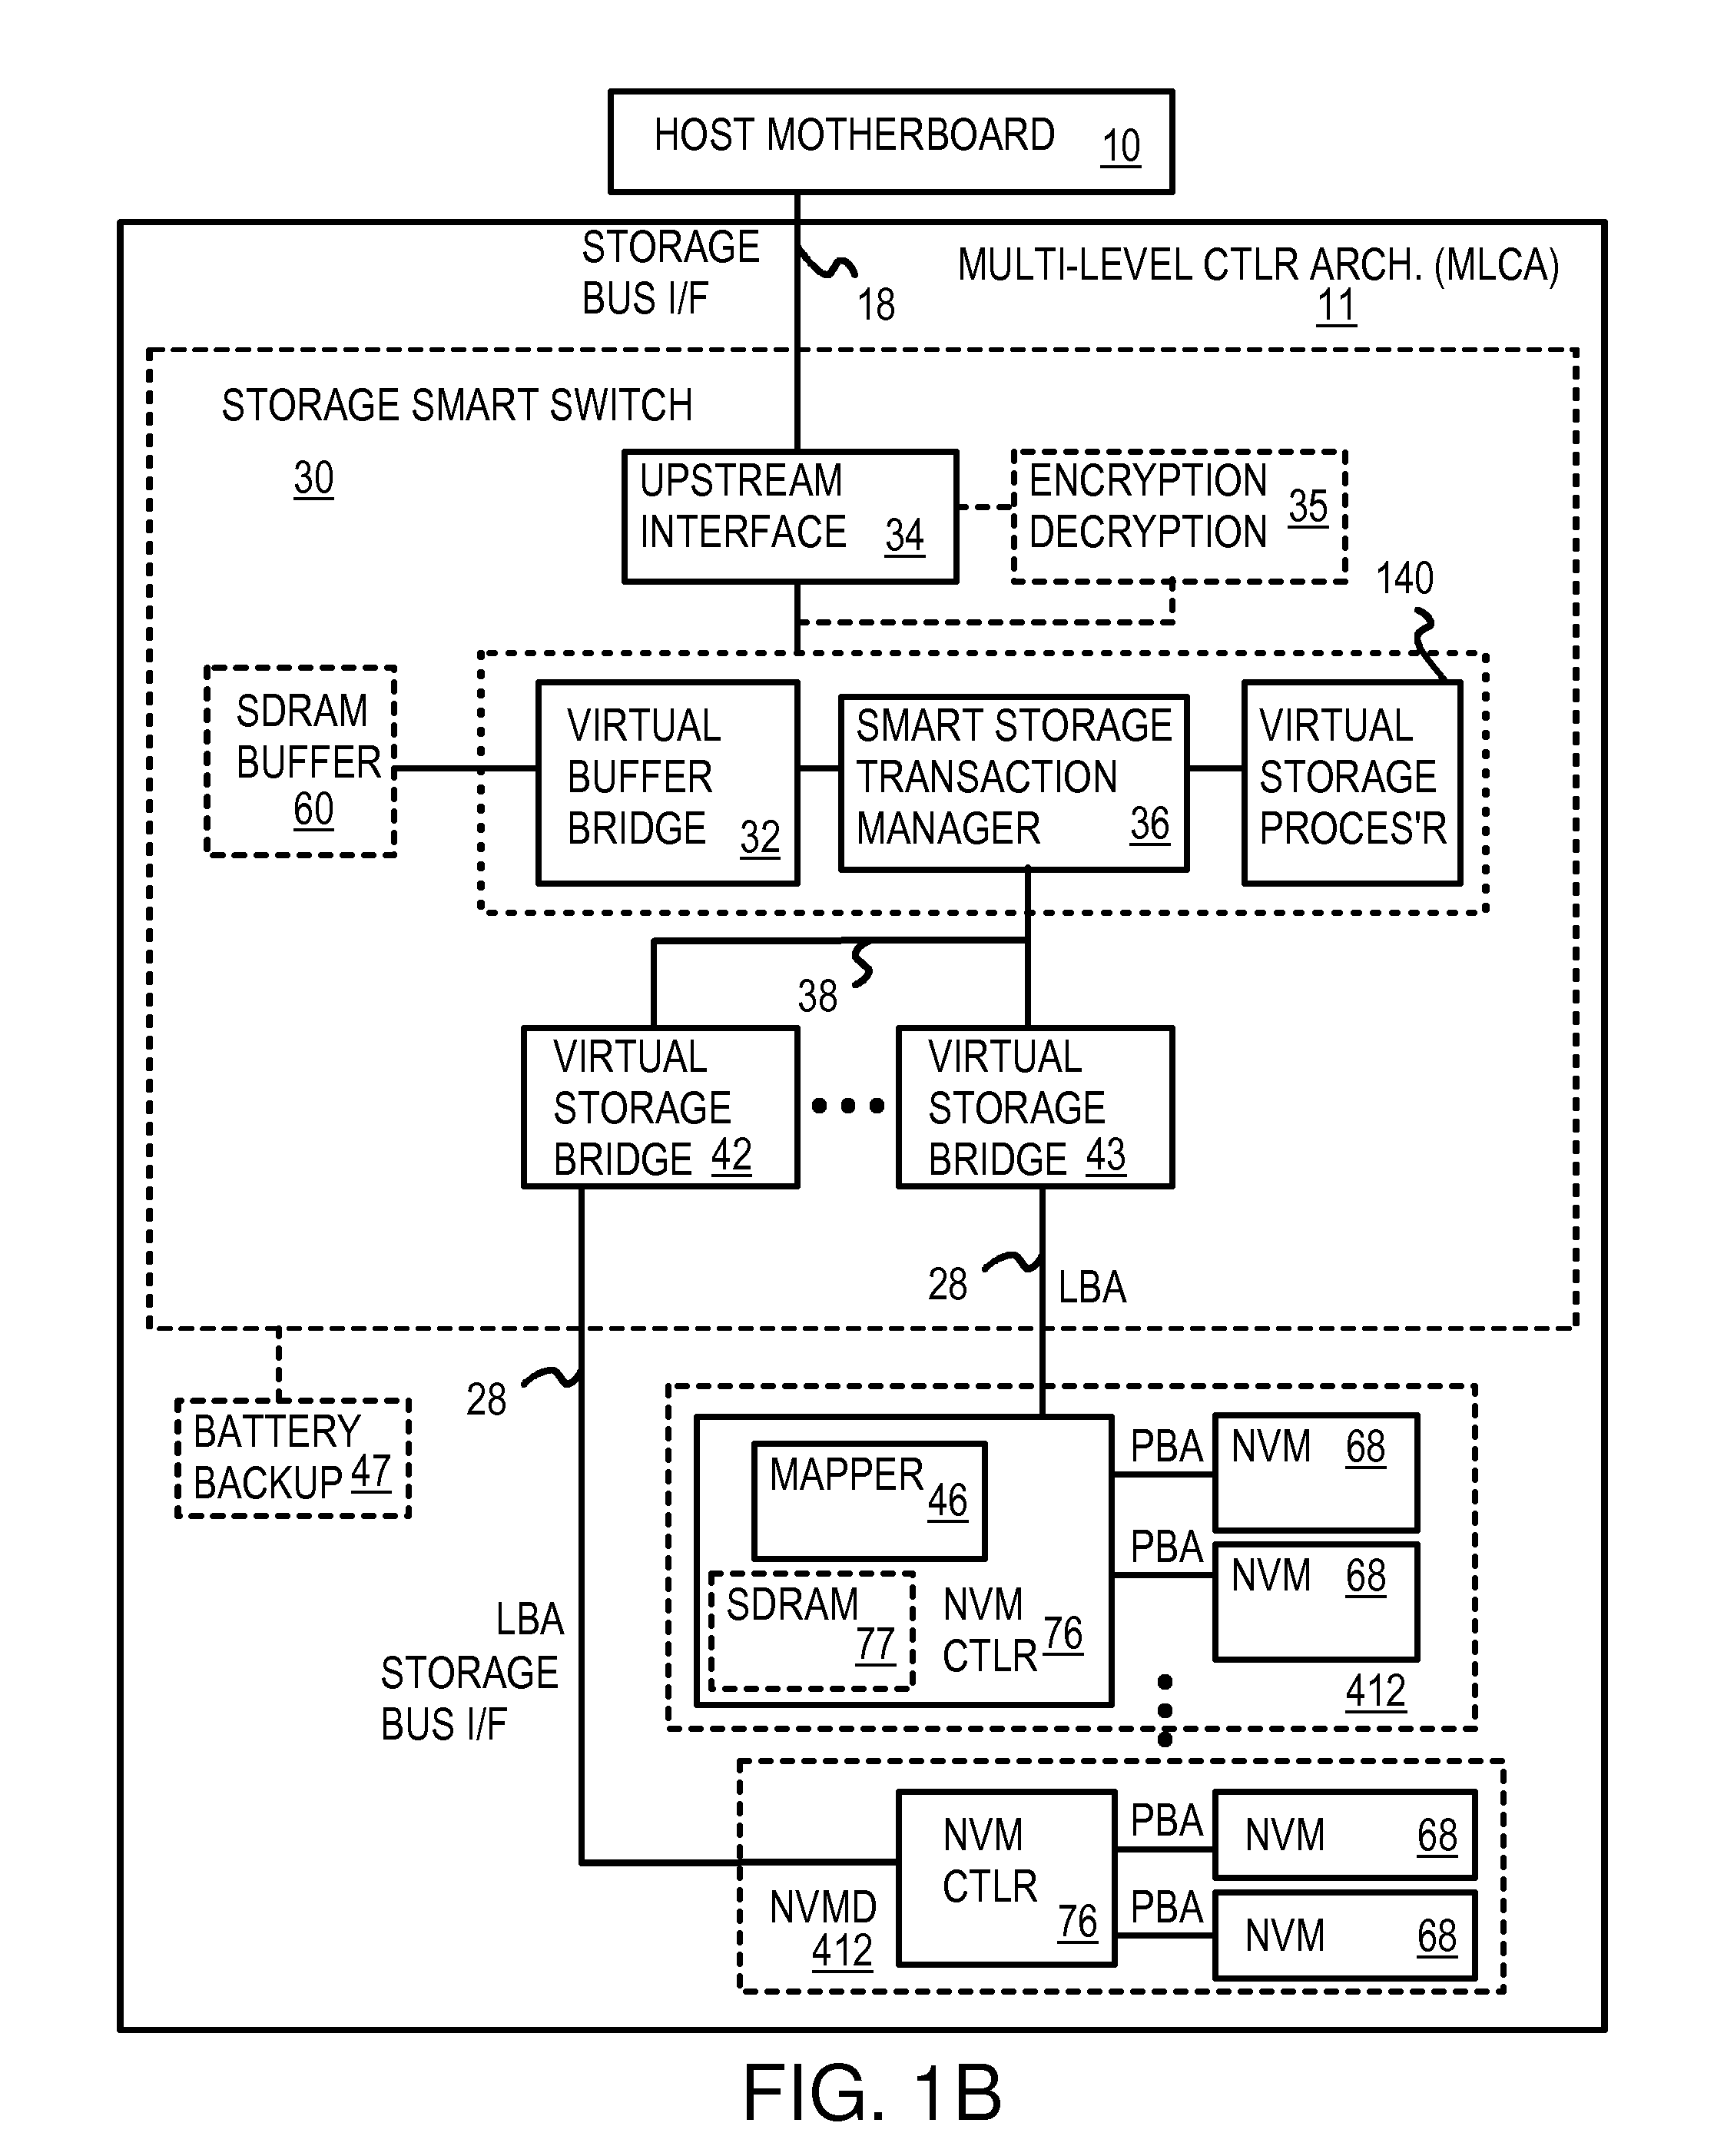 Flash-memory system with enhanced smart-storage switch and packed meta-data cache for mitigating write amplification by delaying and merging writes until a host read